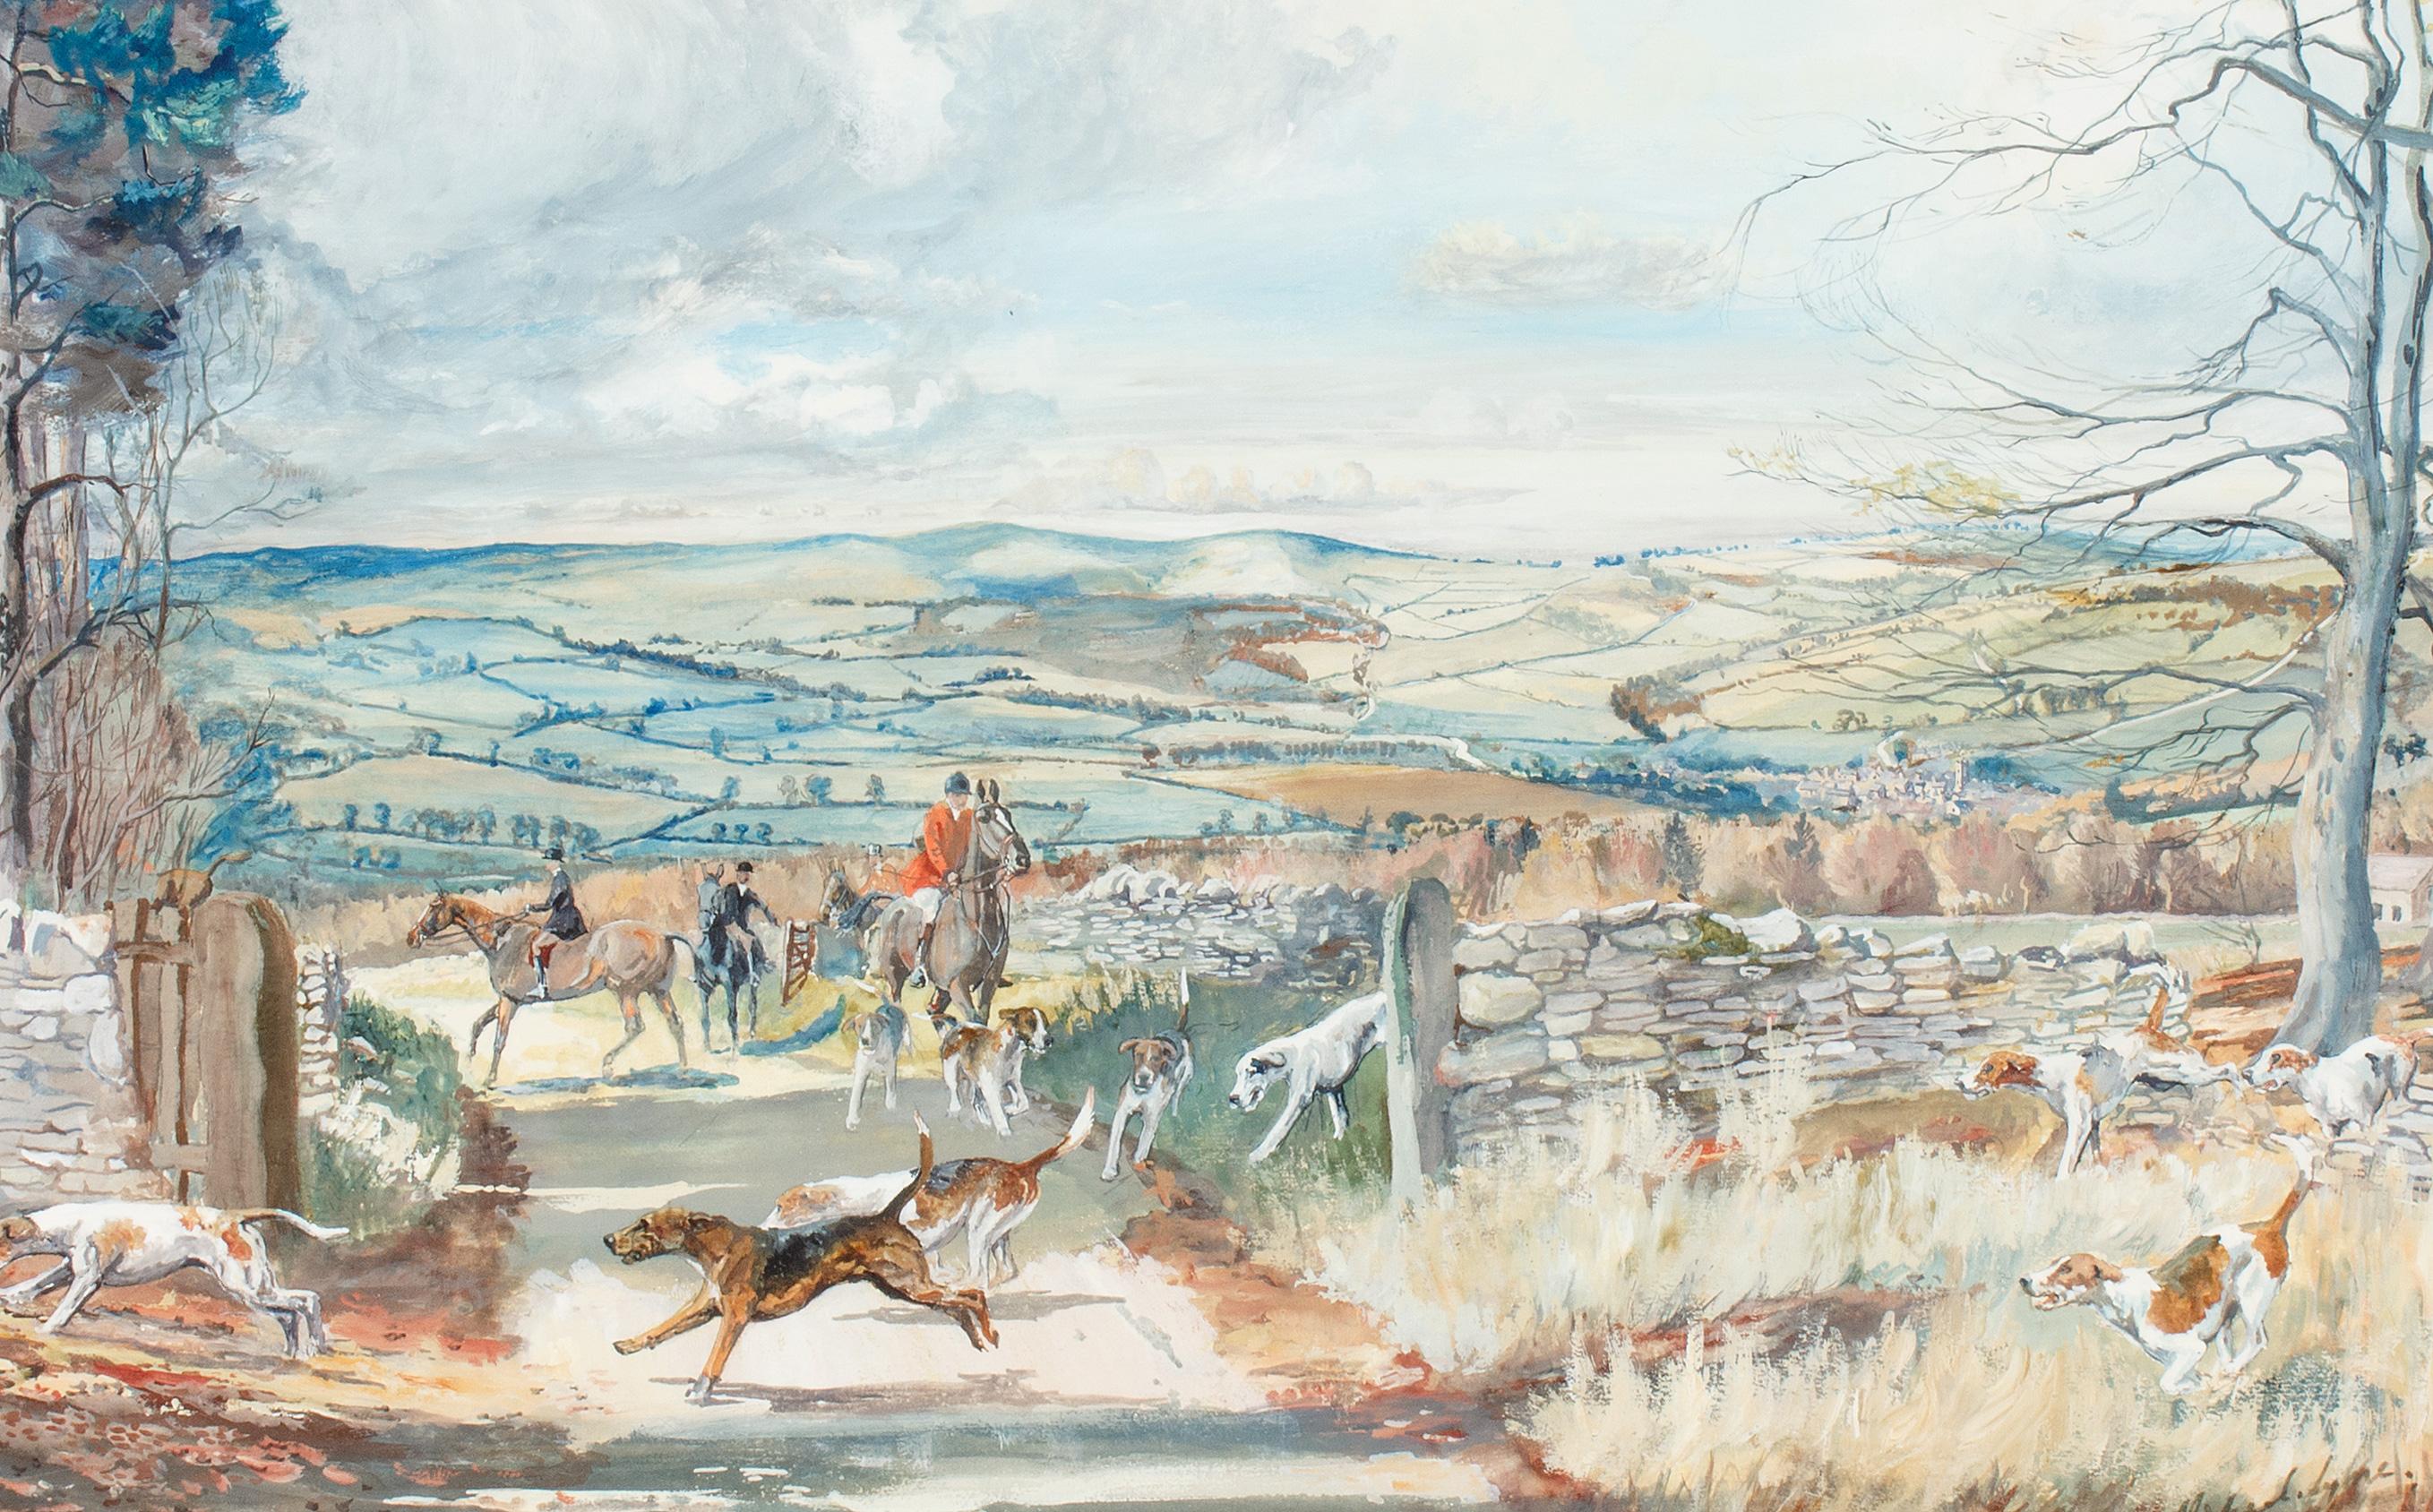 Michael Lyne
(English, 1912-1989)
North Cotswold Hounds on Sudeley Hill, 1934
Gouache on paper, 11 3/4 x 18 1/2 inches
Signed and dated at lower right: 